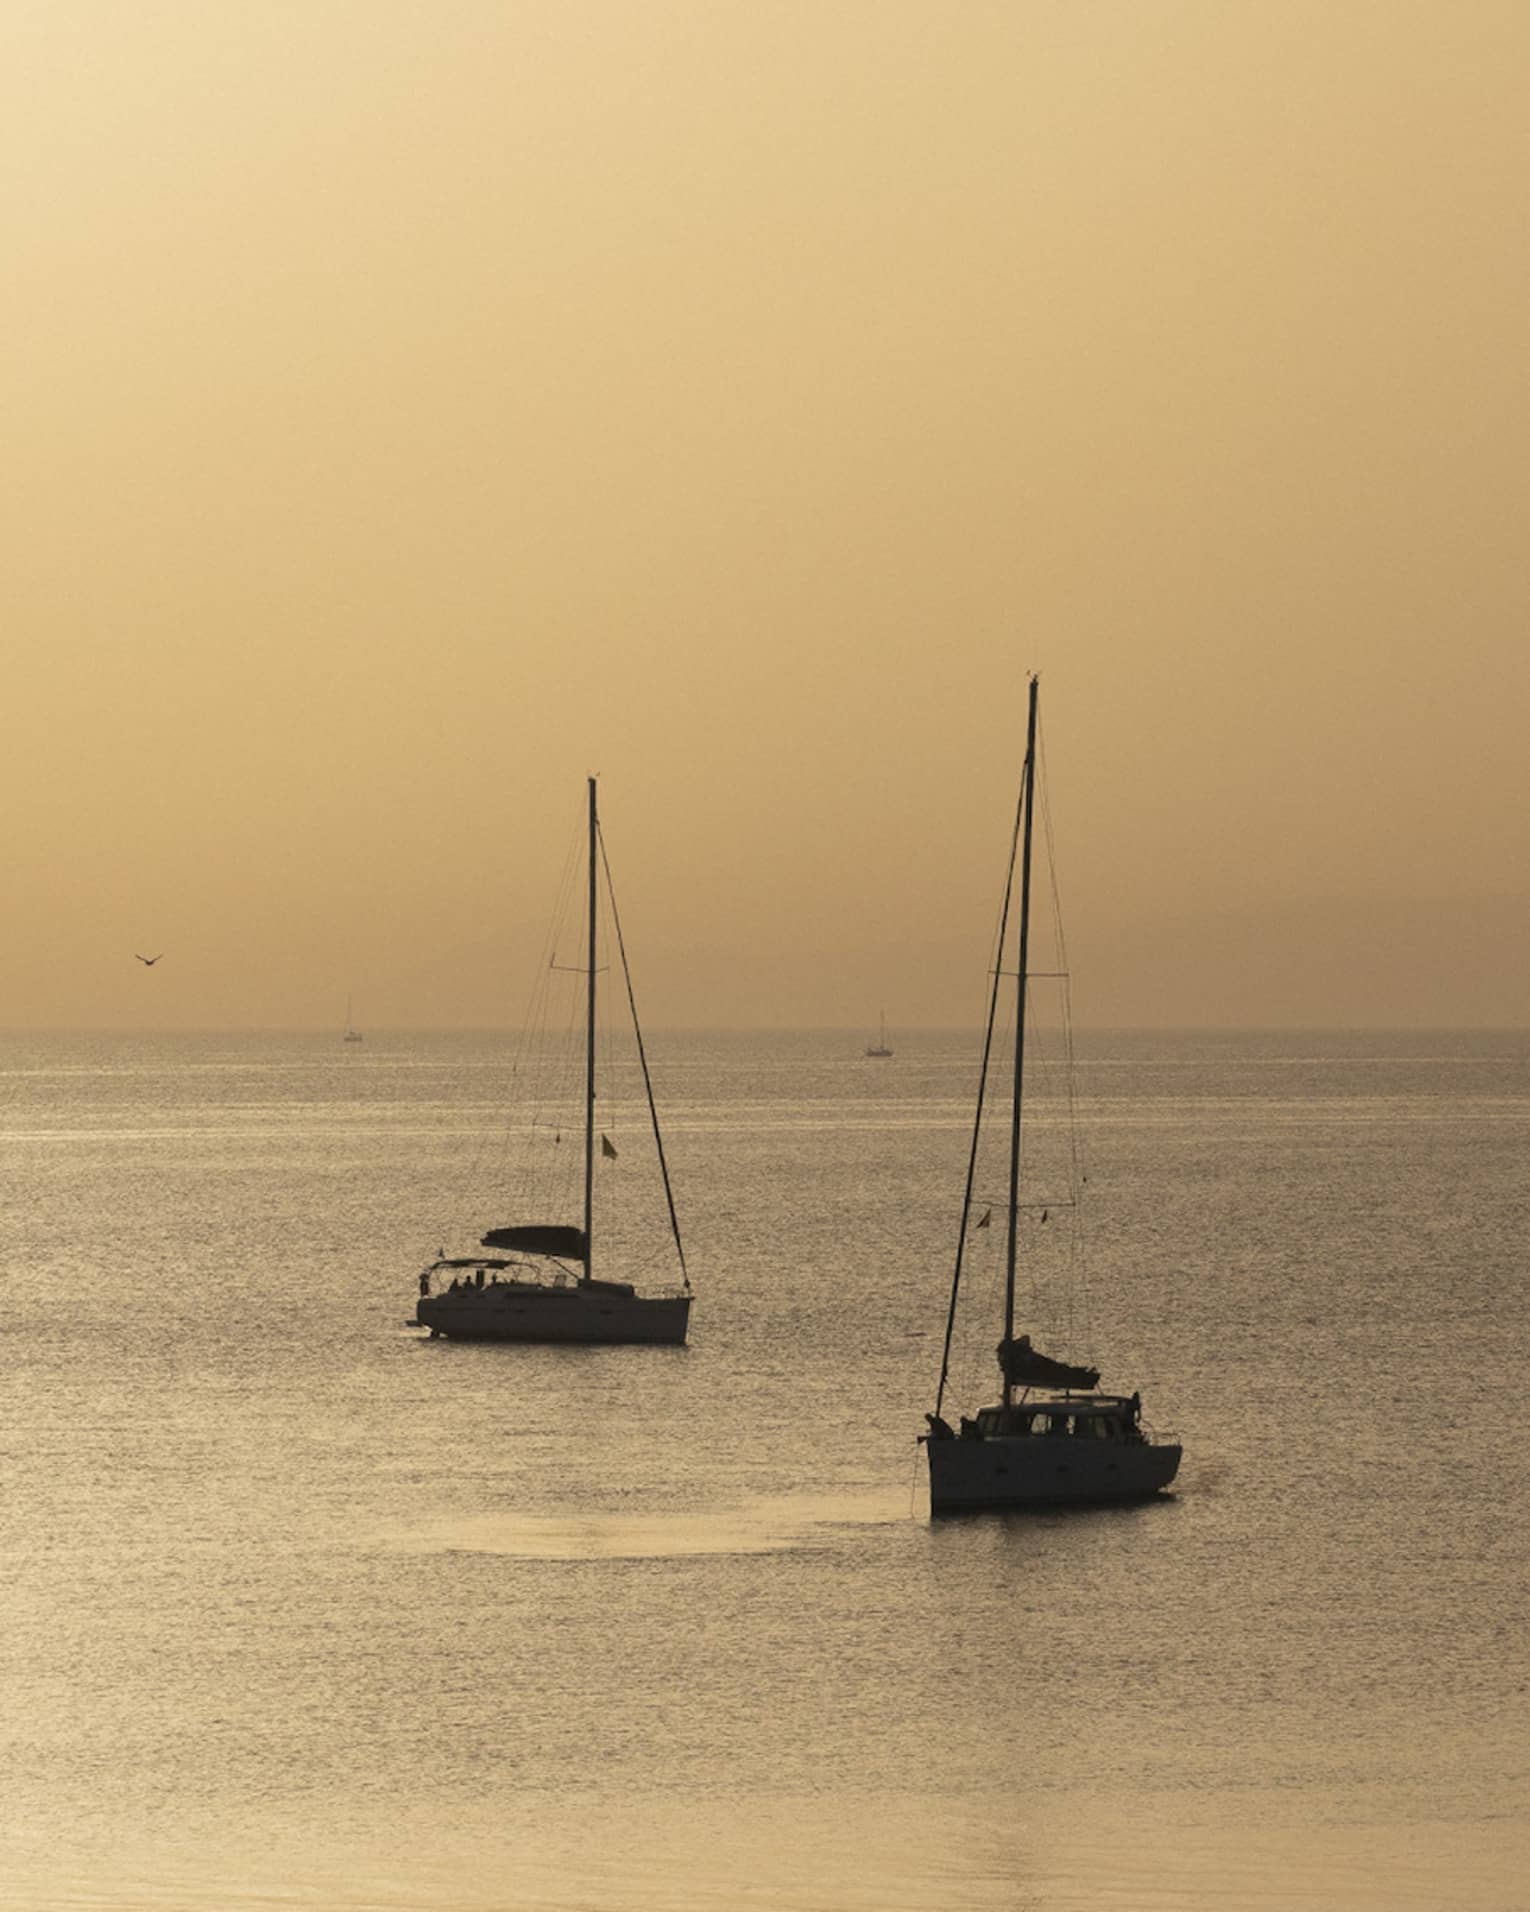 Silhouette of two sailboats at dusk on ocean cruising Greek isles. 